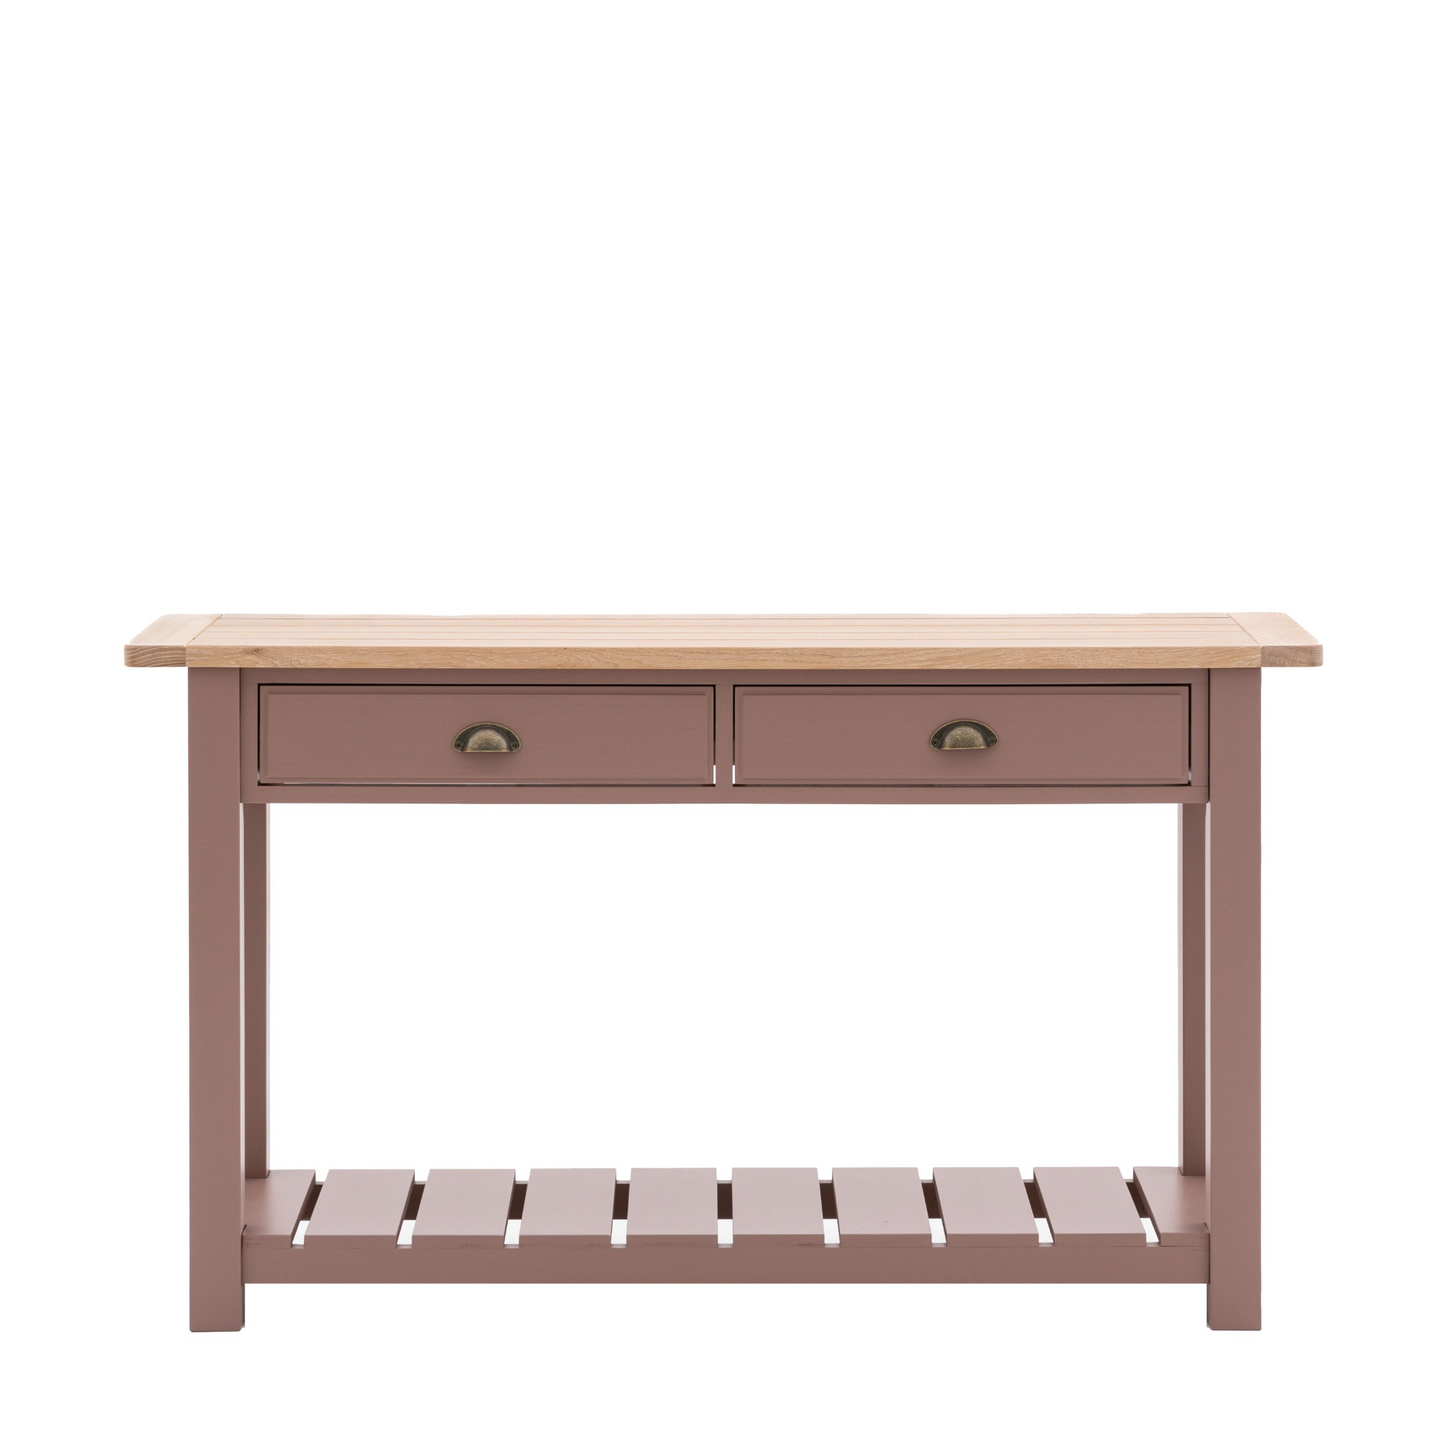 A Buckland Console Table (w)1400x(d)380x(h)800mm in Clay with two drawers perfect for interior decor and home furniture from Kikiathome.co.uk.